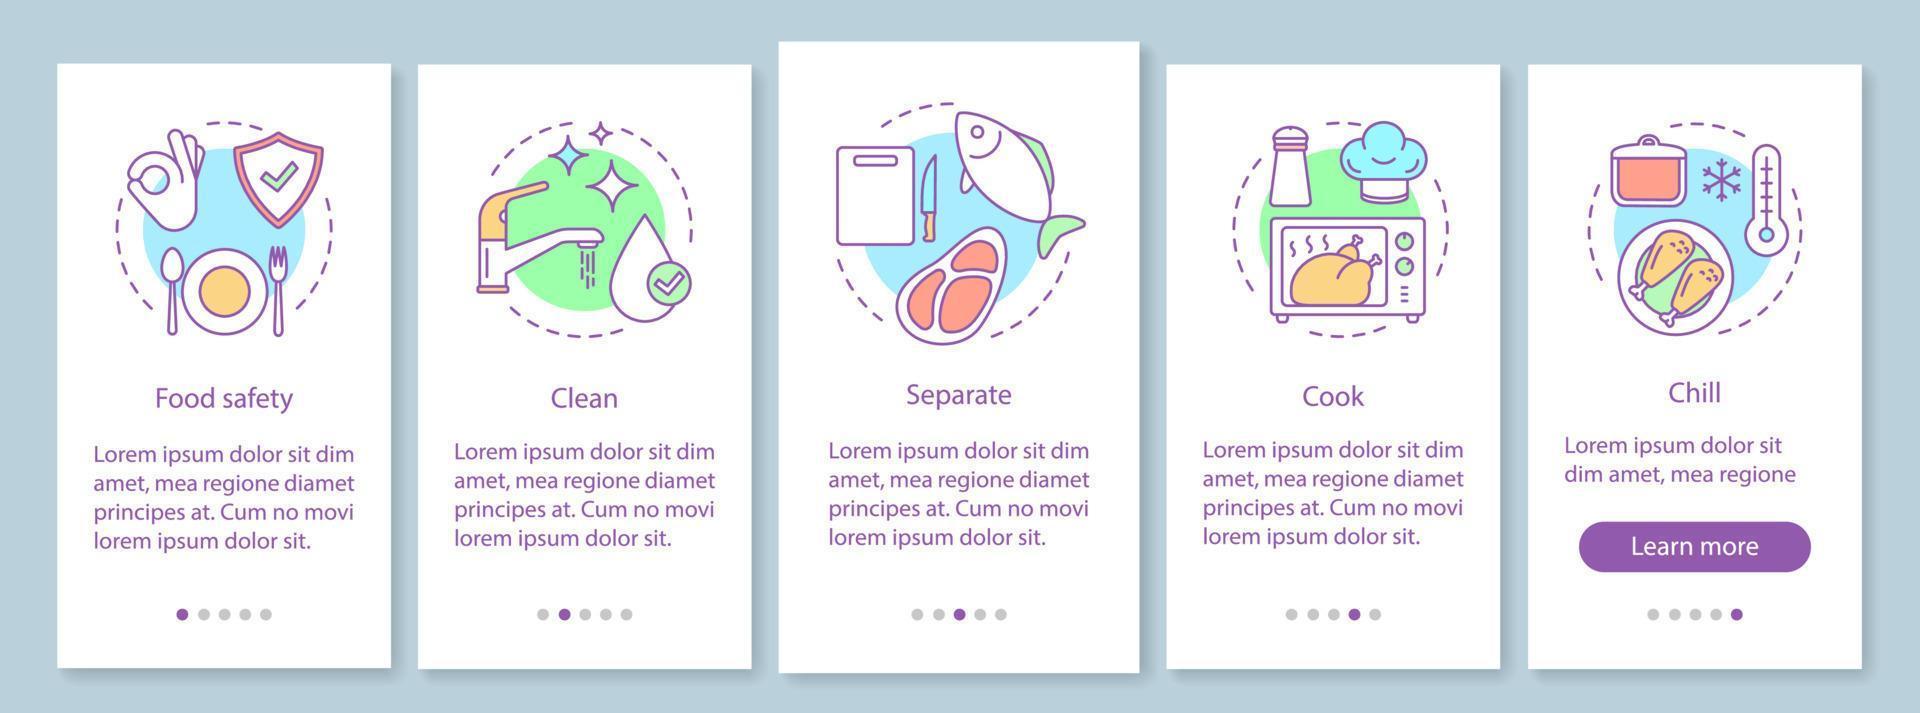 Food safety onboarding mobile app page screen template. Food processing, handling, preparation and storage. Foodborne disease prevention. Walkthrough website steps. UX, UI, GUI smartphone interface vector